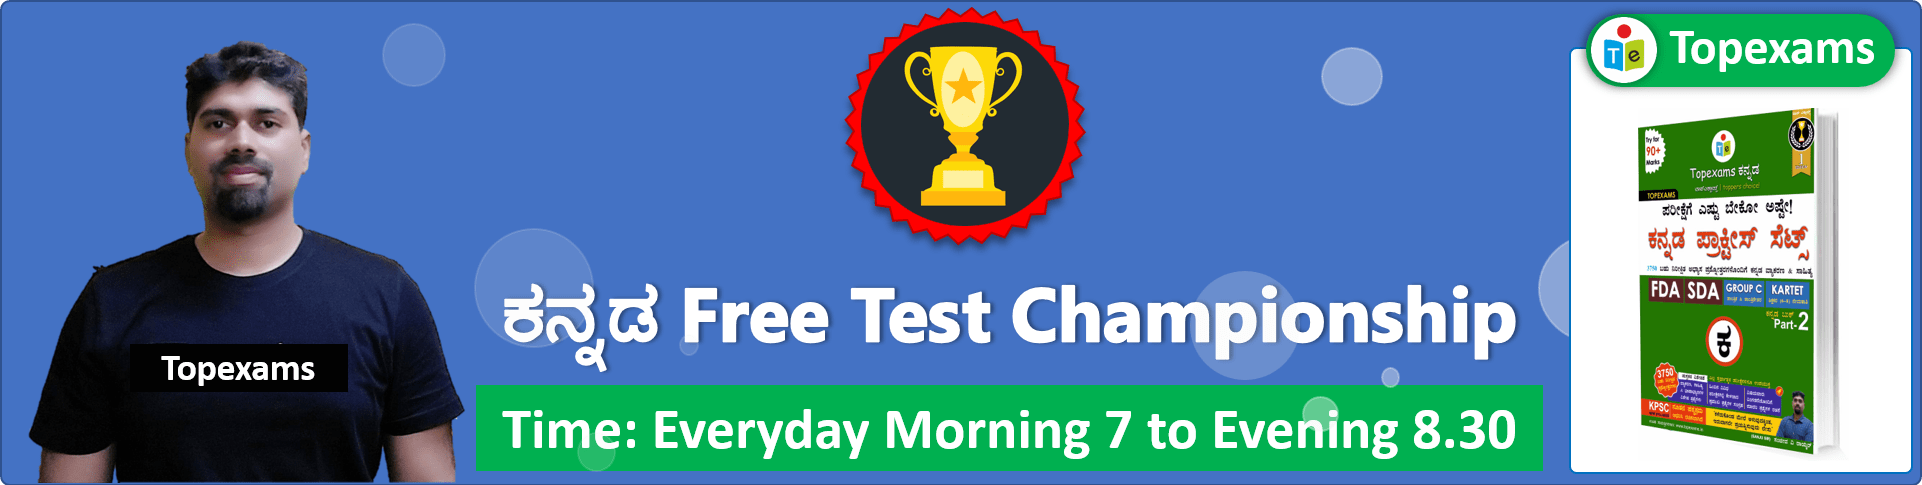 You are currently viewing ಕನ್ನಡ Championship Test-4 For SDA, FDA, Group C, KARTET